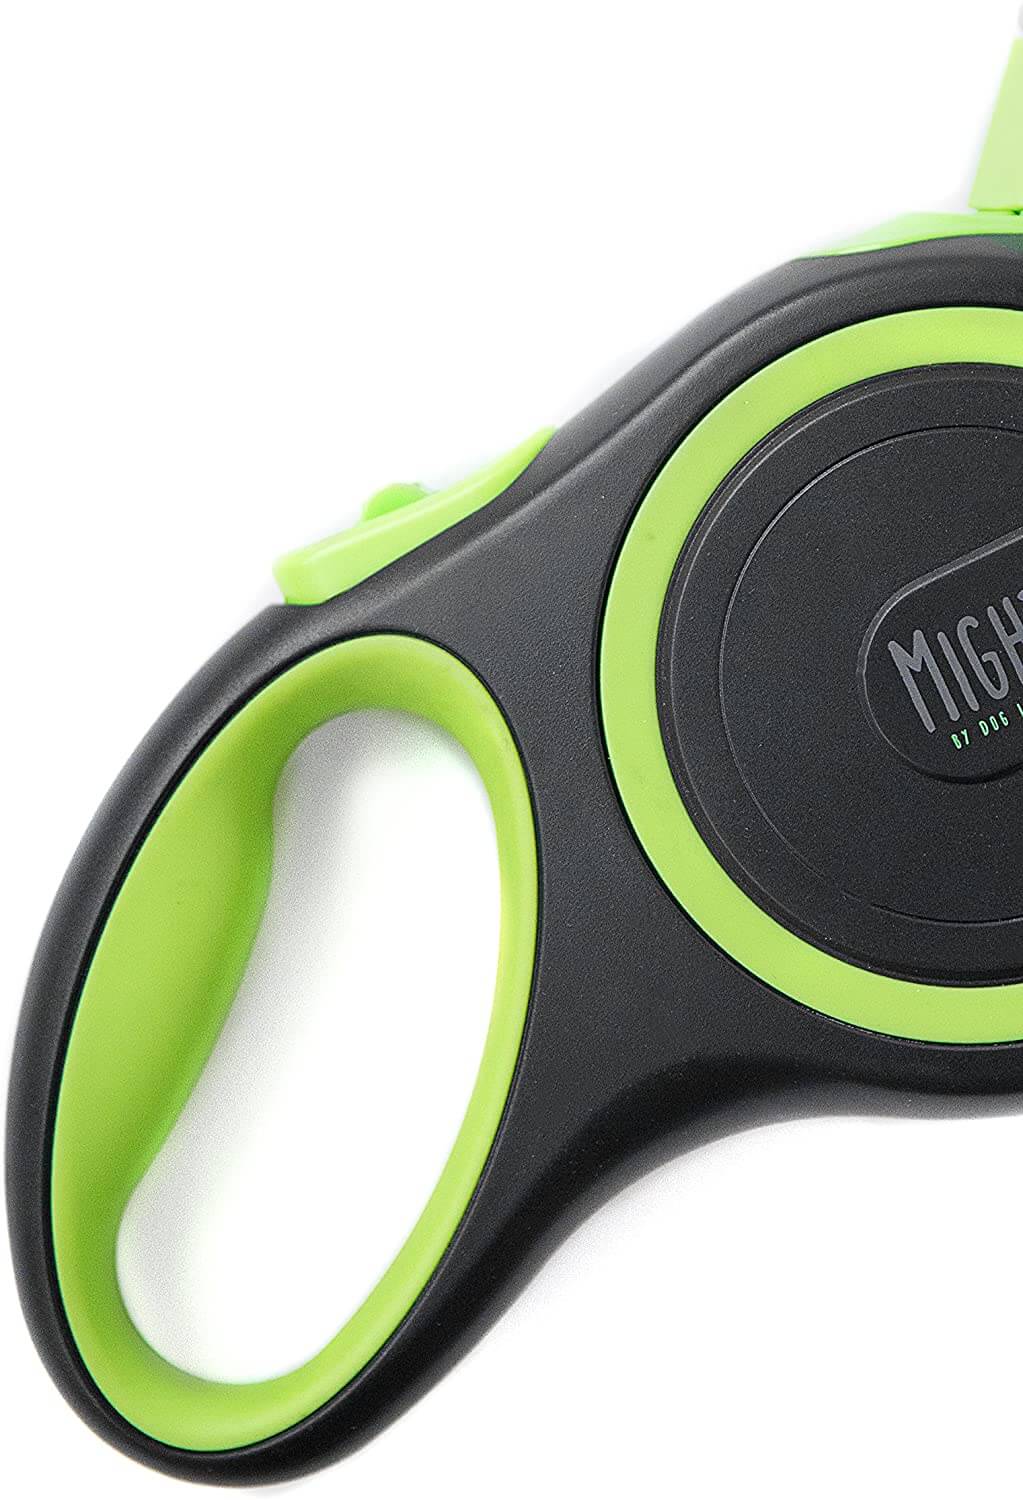 Durable and Reflective Retractable Dog Leash by Mighty Paw